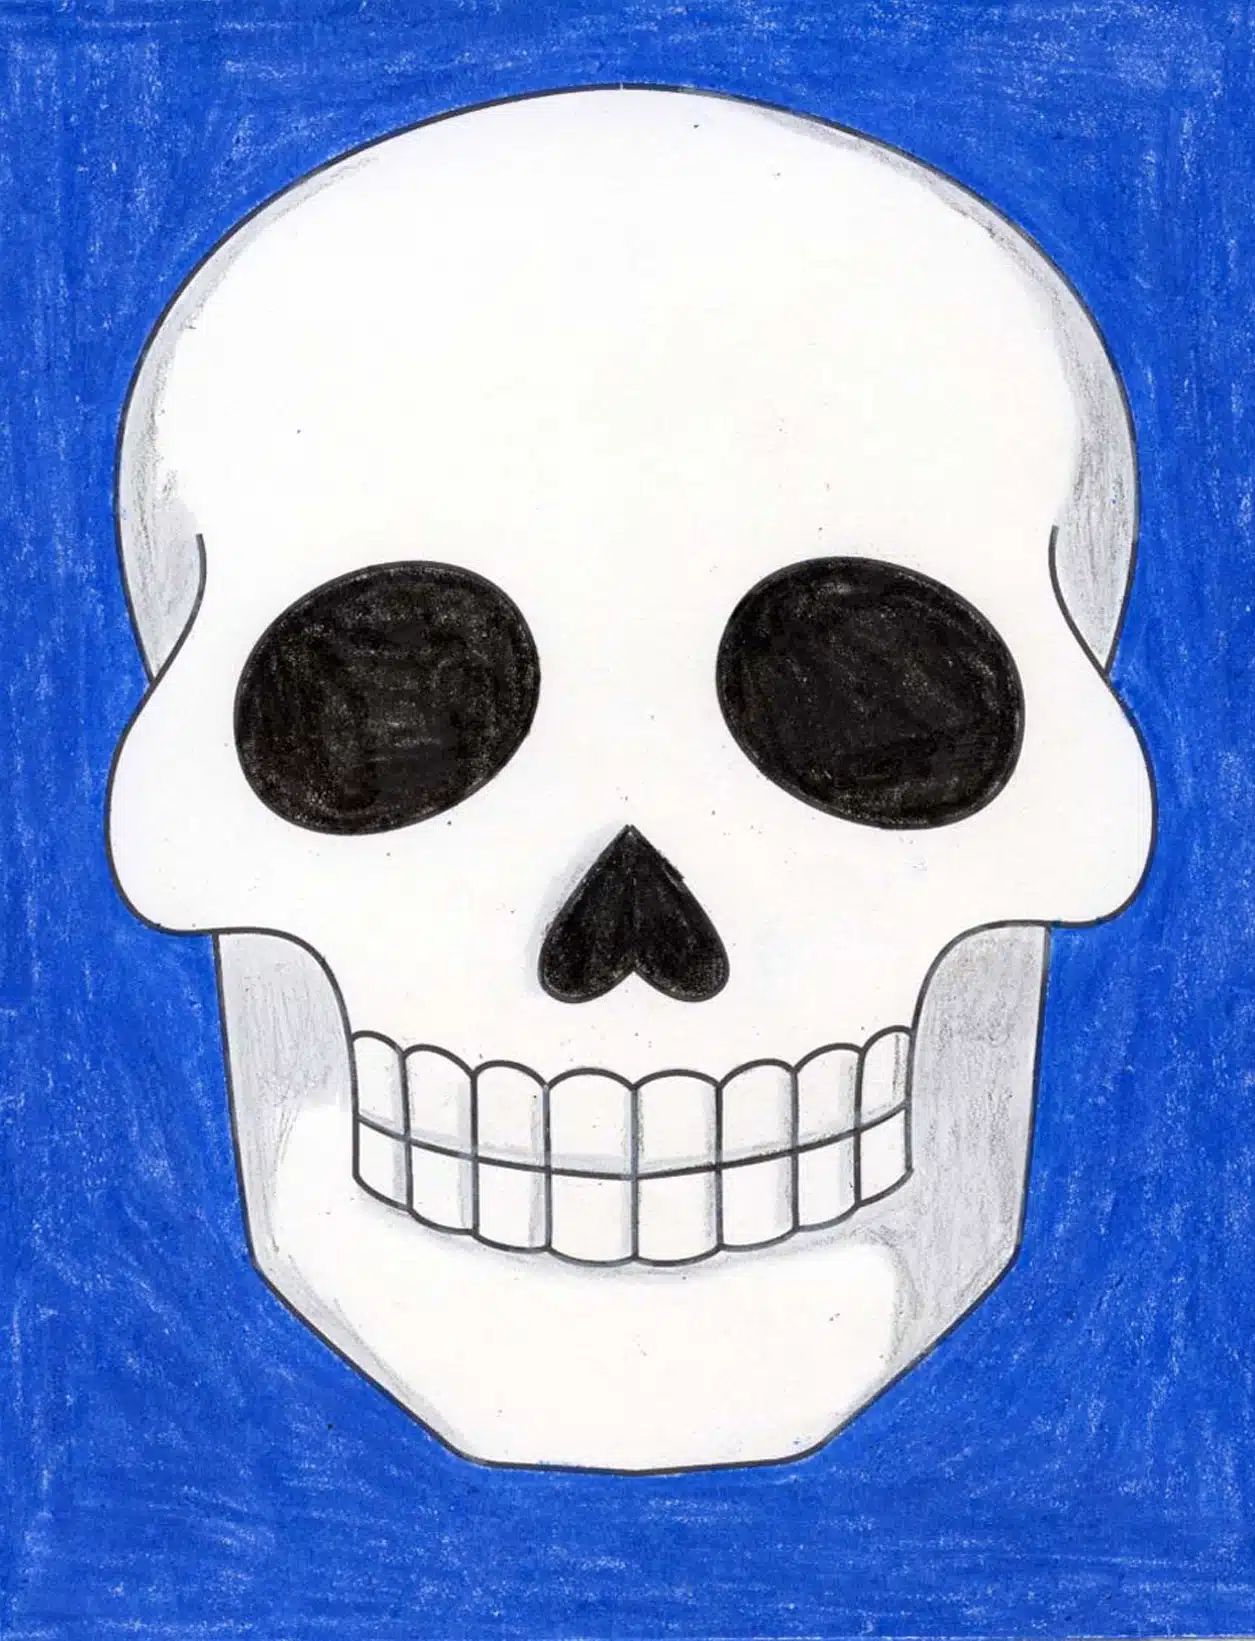 Easy How to Draw a Skull Tutorial and Skull Coloring Page